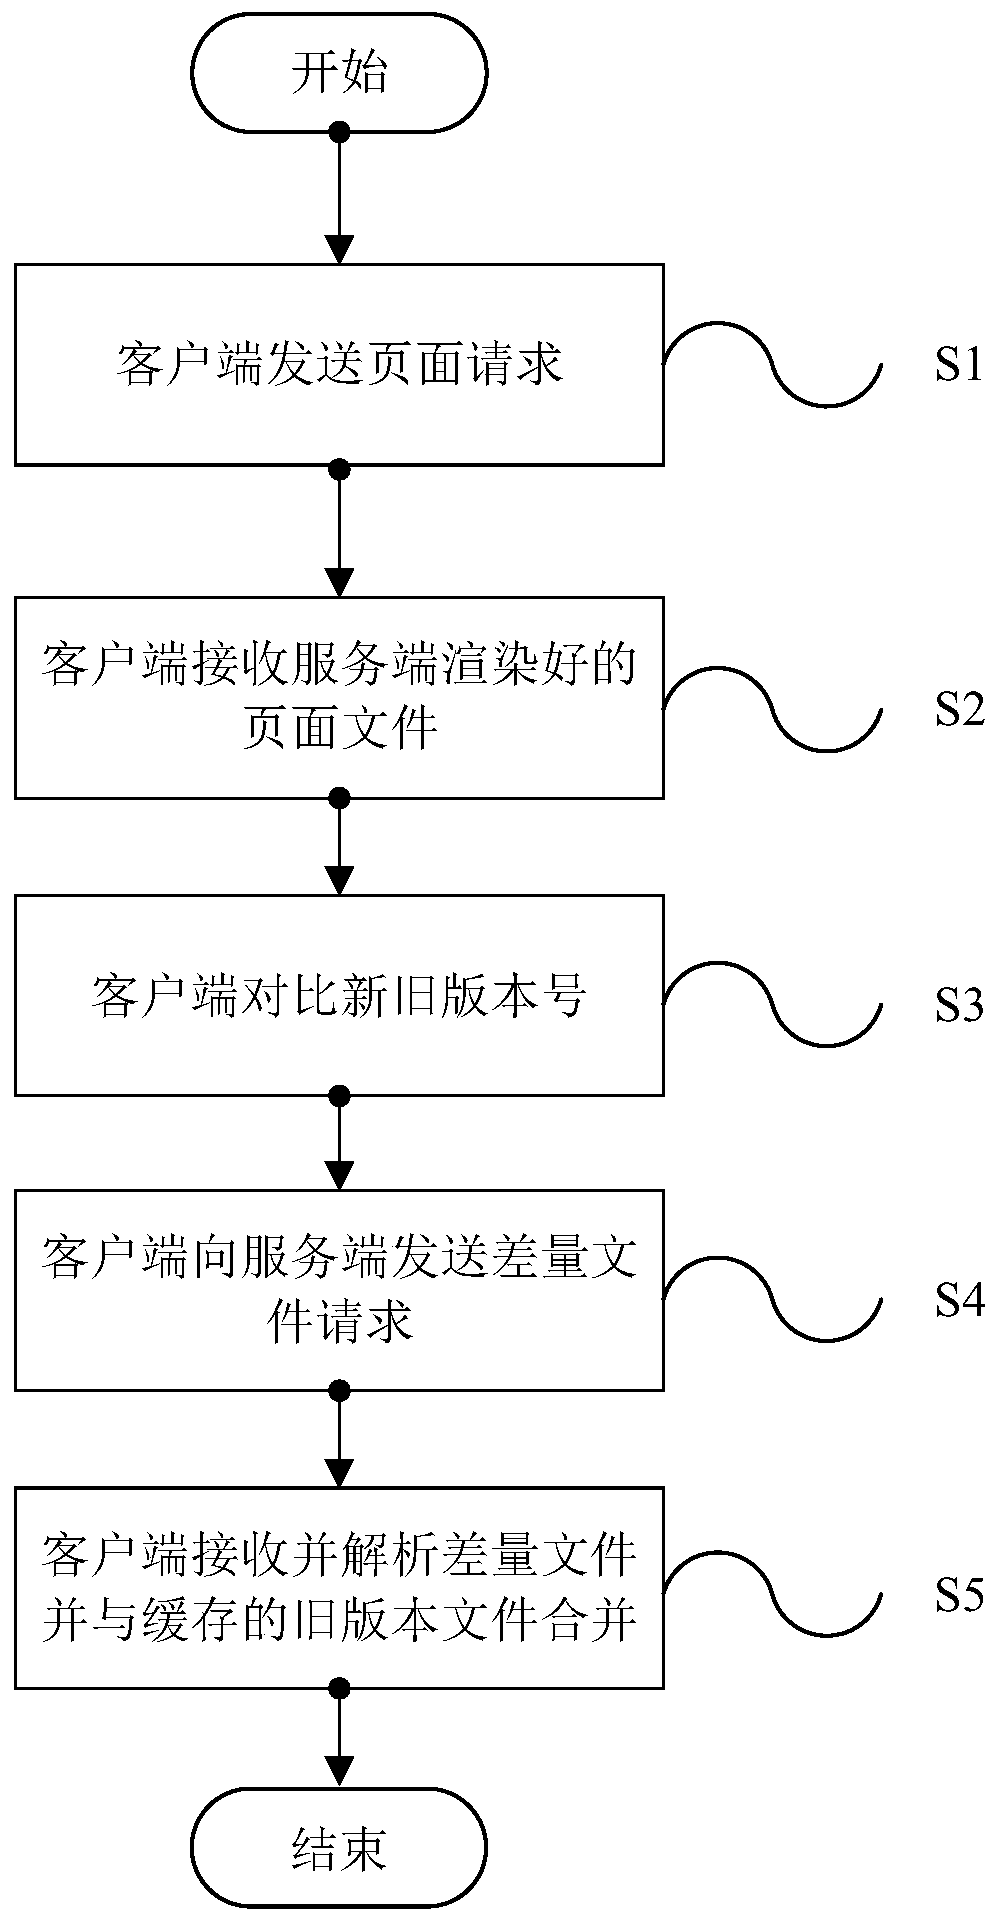 Mobile web request processing method, device and system based on data deduplication